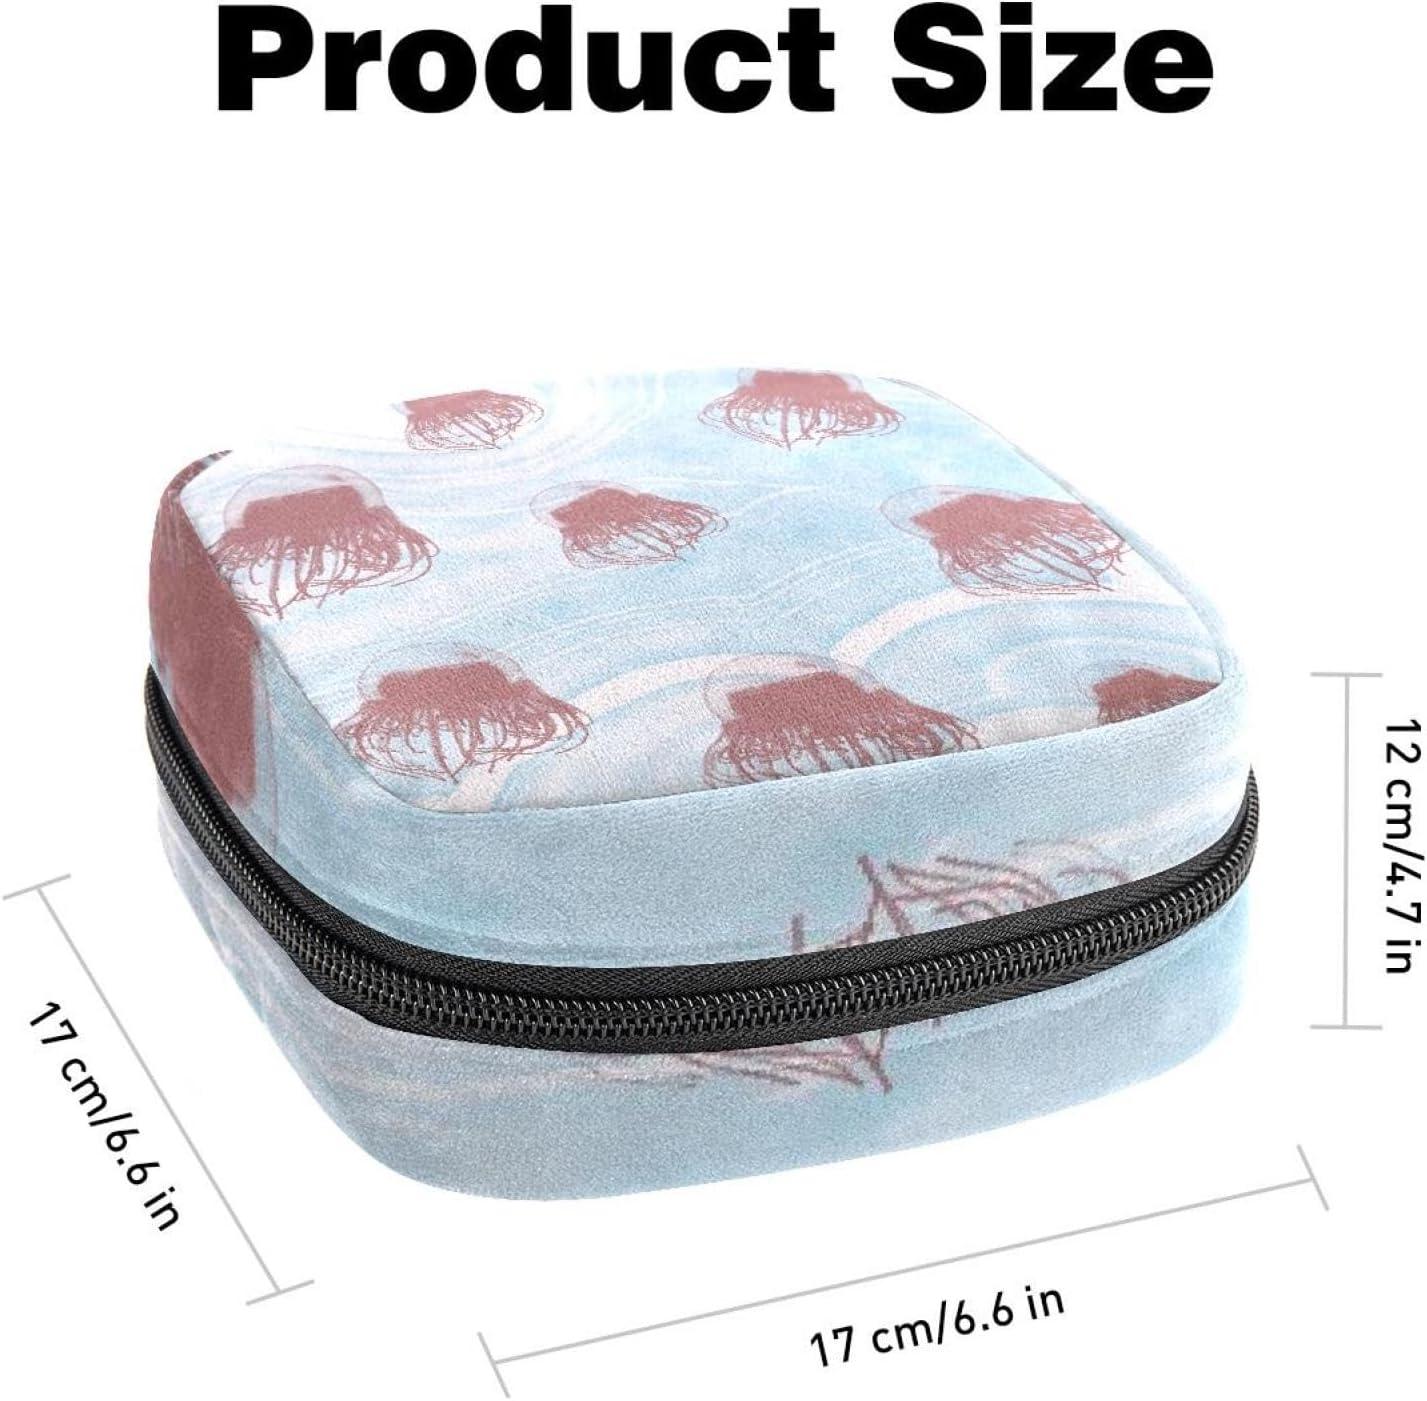 Period Pouch Portable Tampon Storage Bag,Tampon Holder for Purse Feminine  Product Organizer,lion sitting pattern : Health & Household 